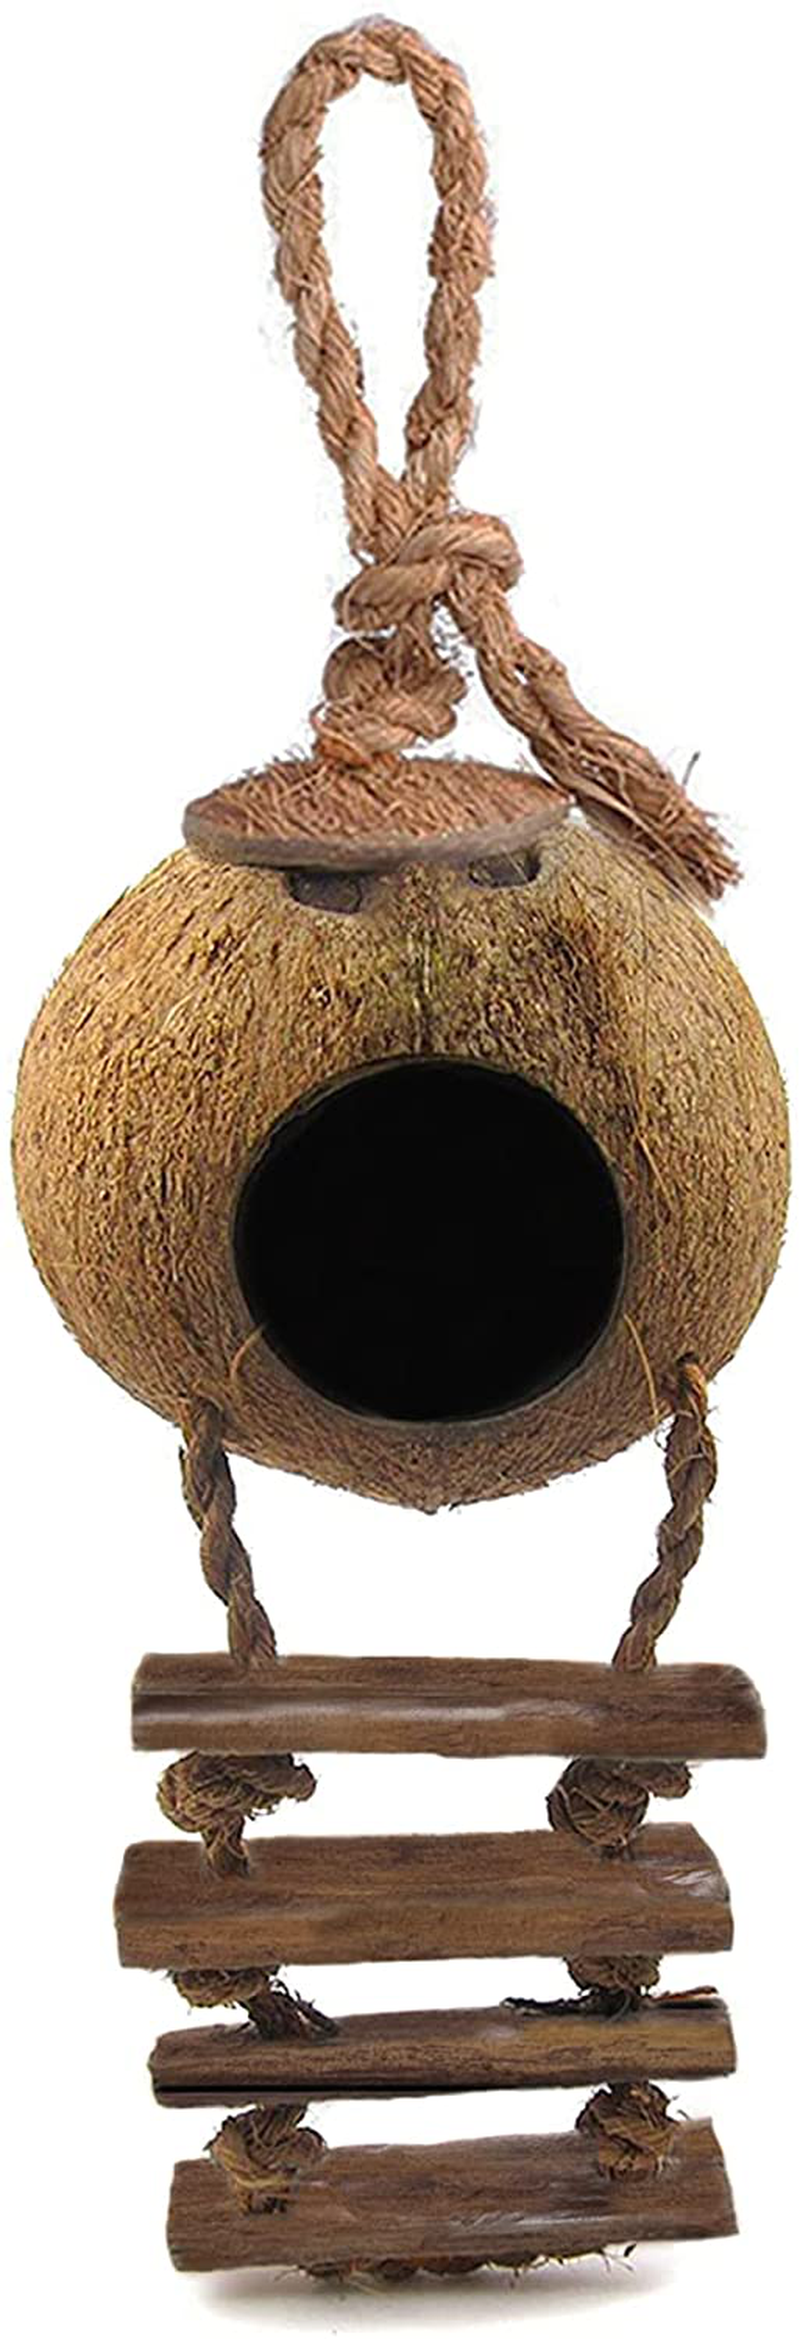 Sungrow Crested Gecko Coco Den with Ladder, 5” Diameter, 2.5” Cave Opening, Raw Coconut Husk Habitat with Hanging Loop, 1 Pc per Pack